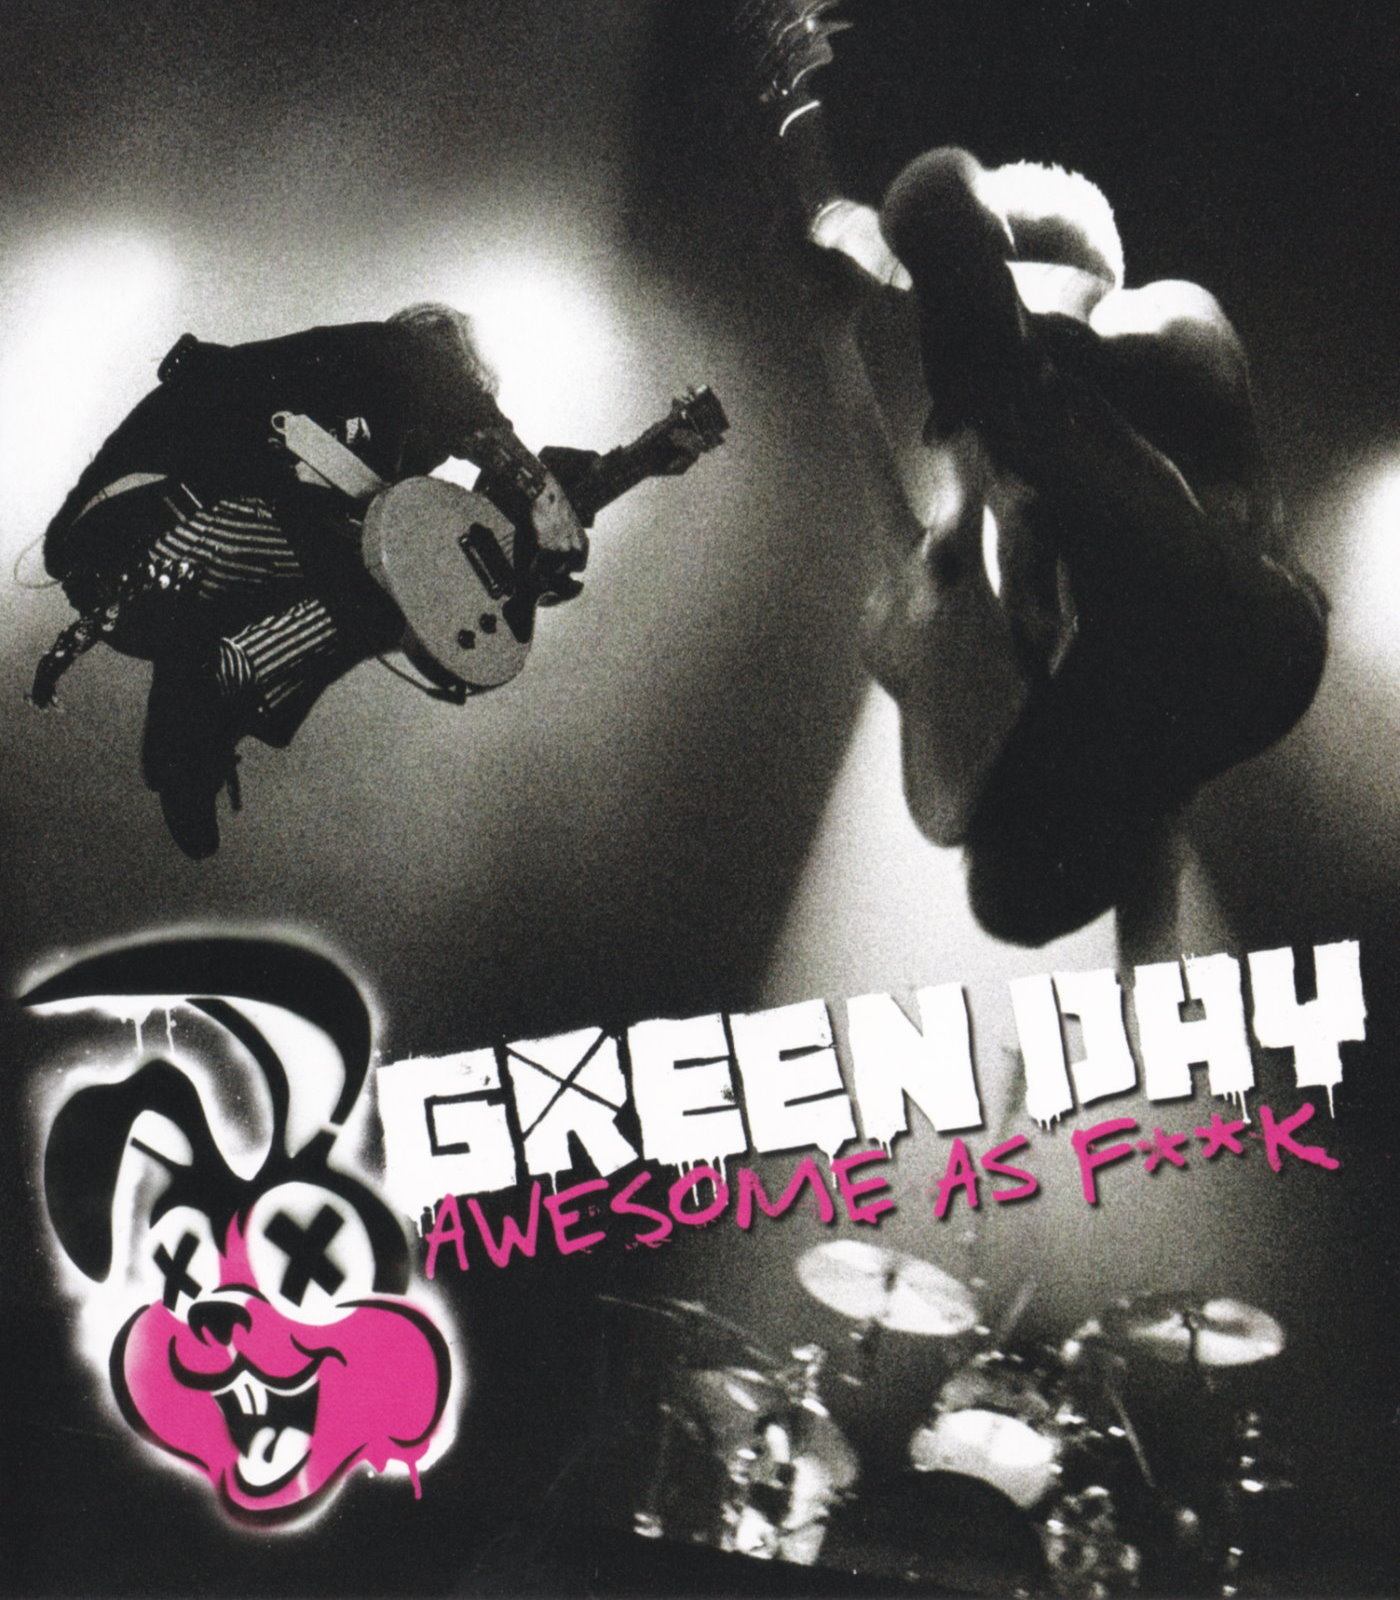 Cover - Green Day - Awesome As F**k.jpg